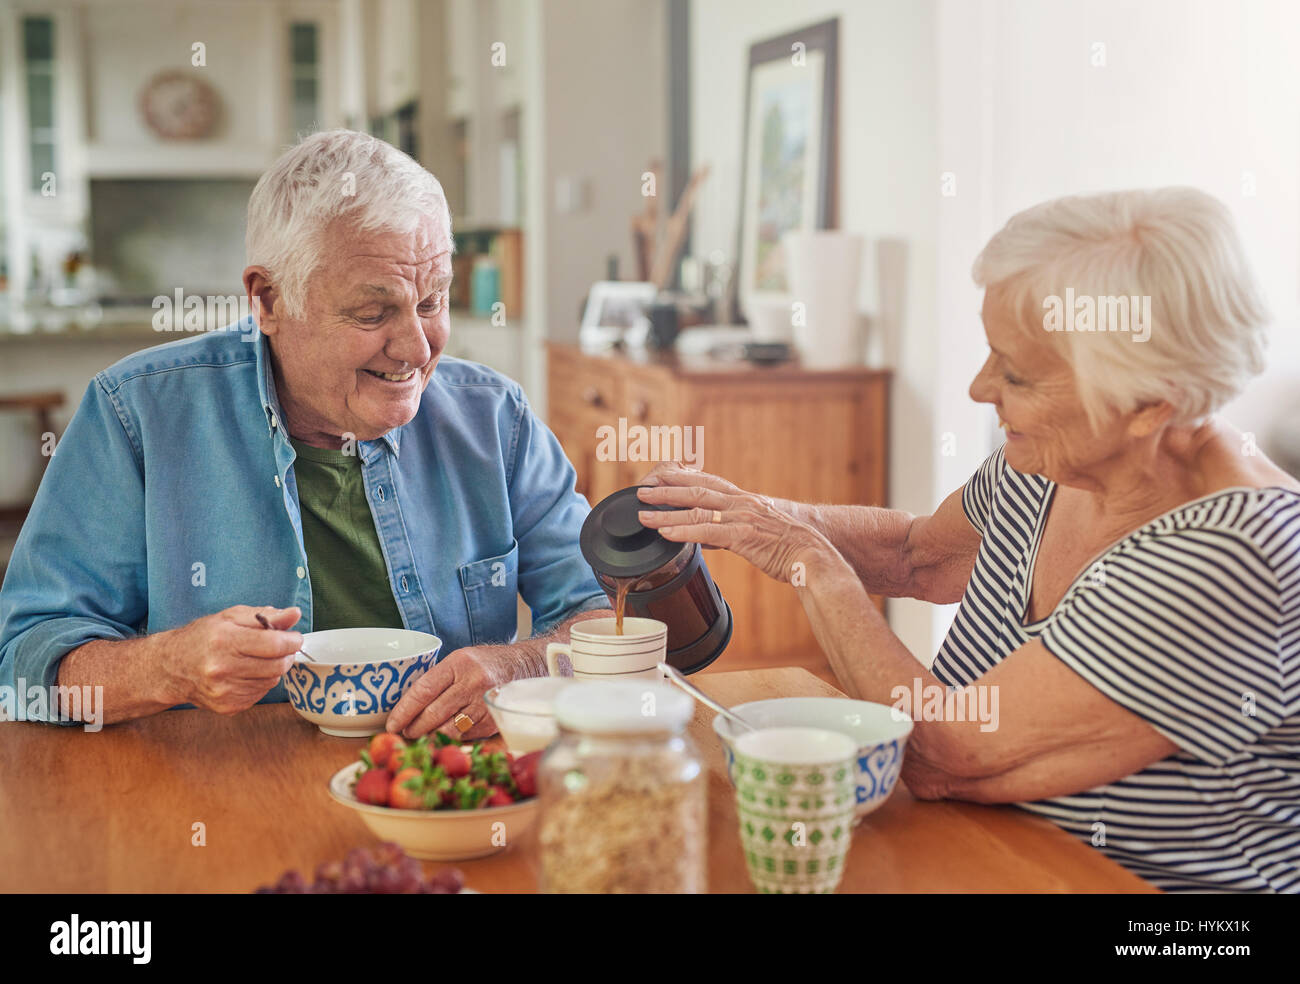 Smiling senior woman pouring her husband a coffee over breakfast Stock Photo